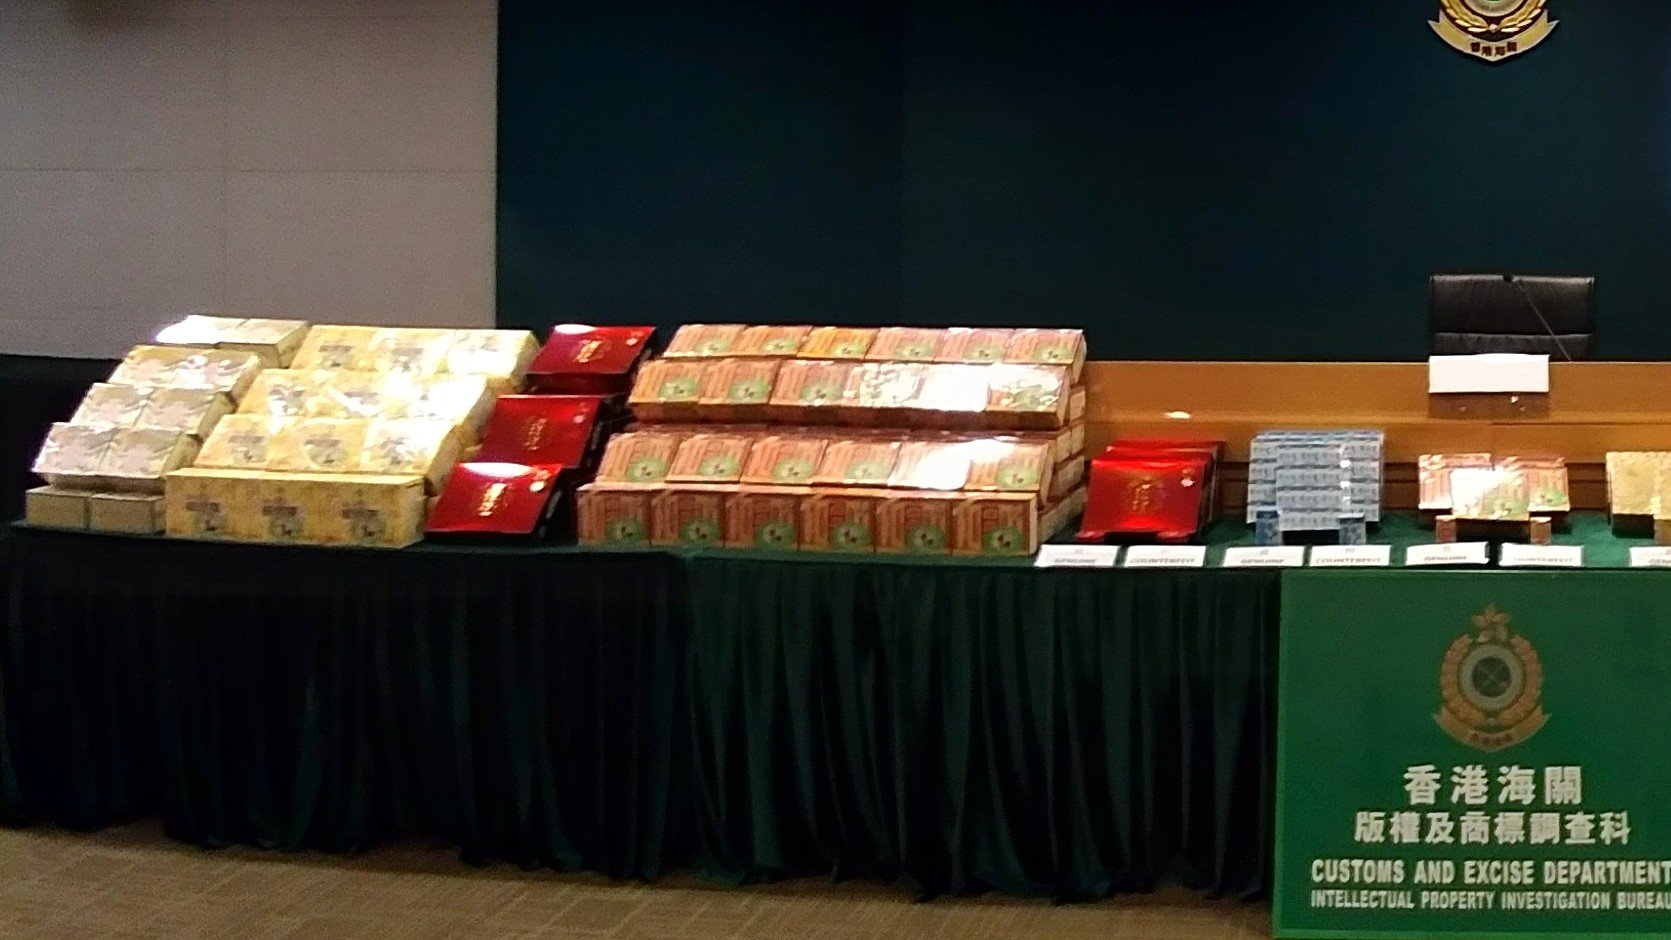 Customs seized about 3,500 boxes and 500 bottles of counterfeit proprietary Chinese medicine. Photo: ISD